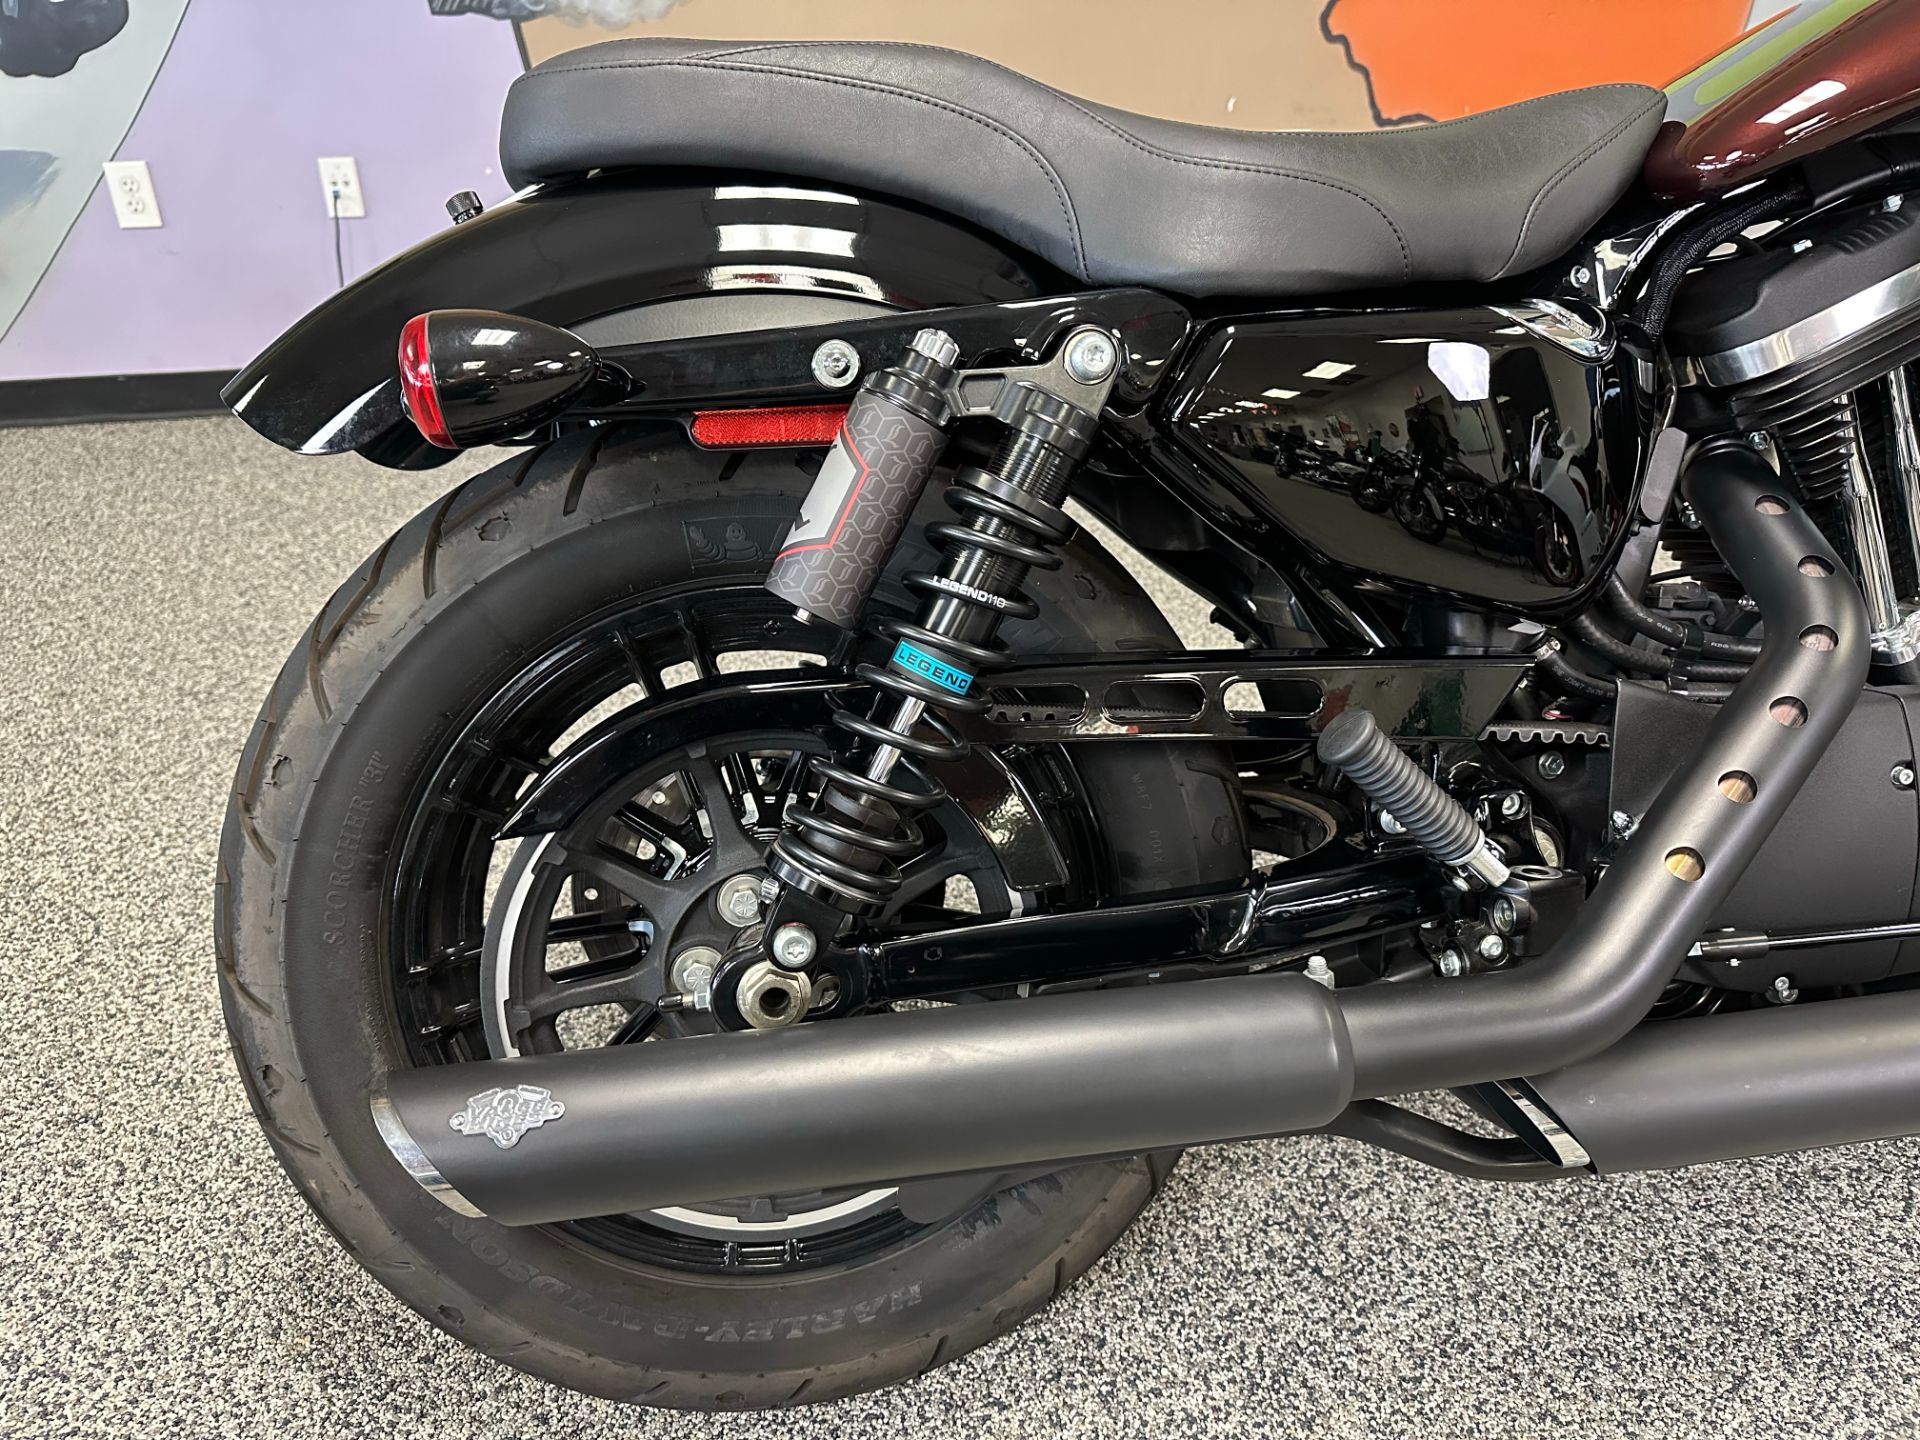 2021 Harley-Davidson Forty-Eight® in Knoxville, Tennessee - Photo 10